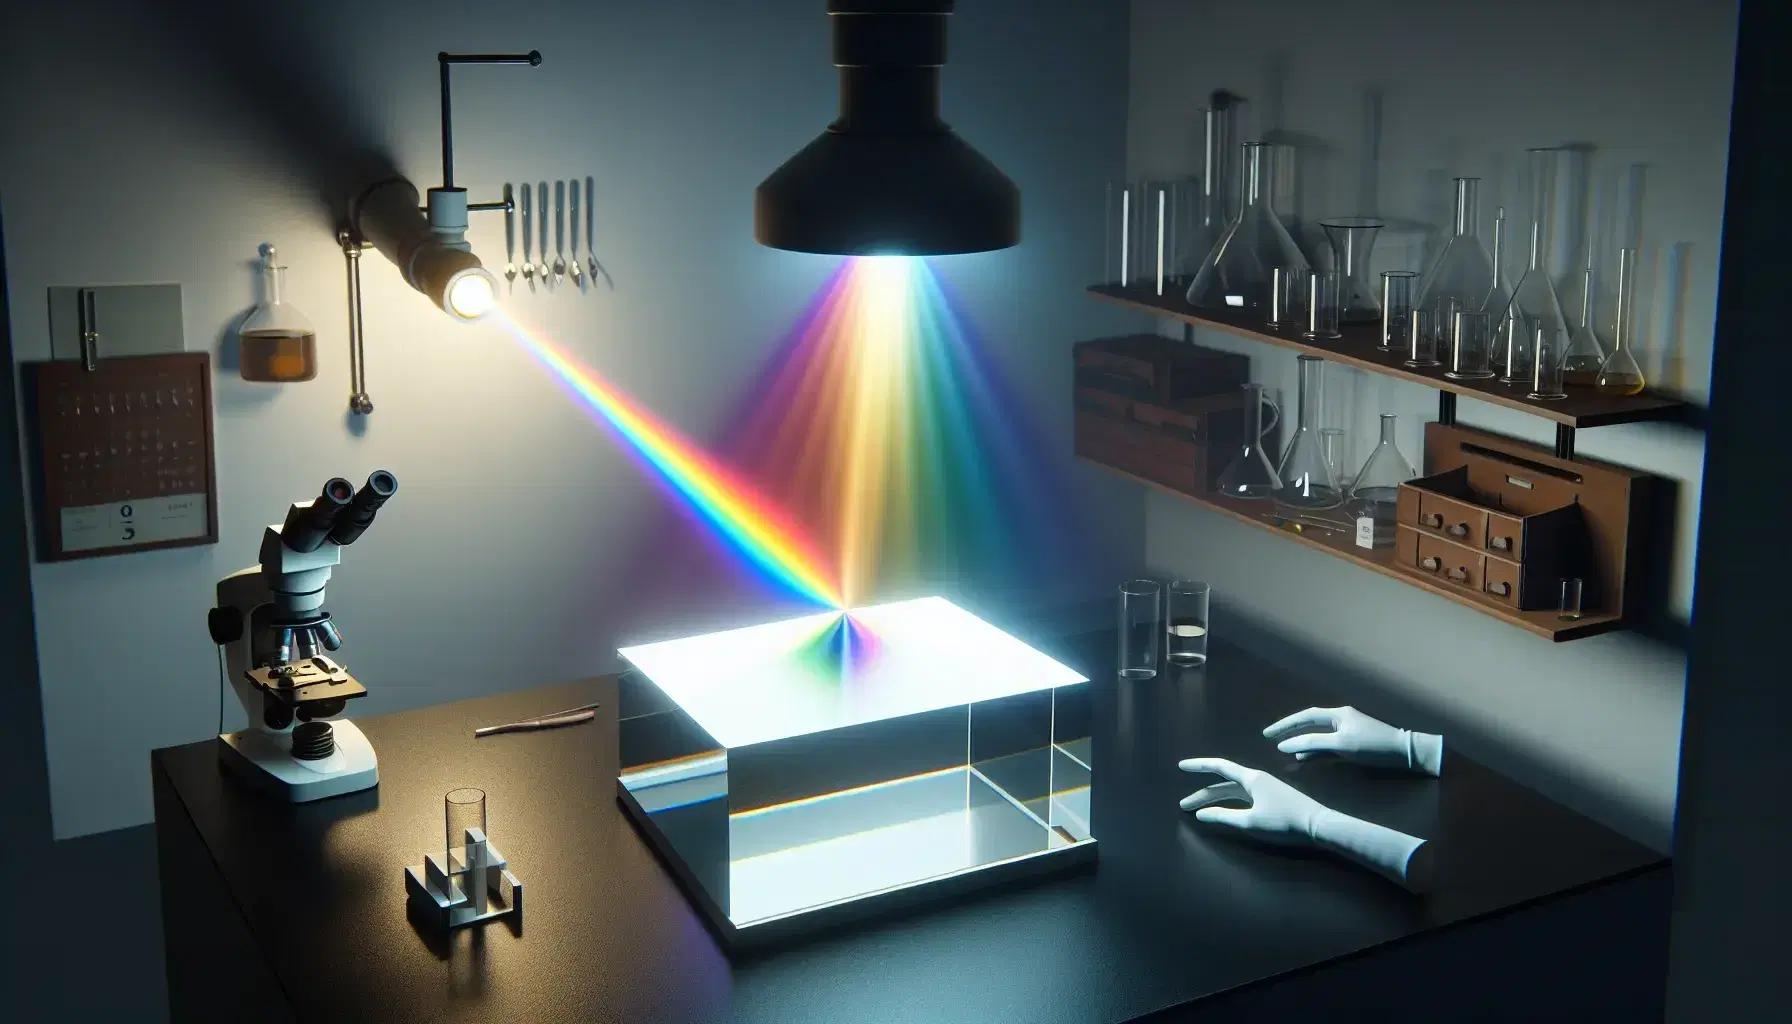 Laboratory prism dispersing white light into a color spectrum on a table, with optical instruments on a shelf and a gloved hand holding a slide.